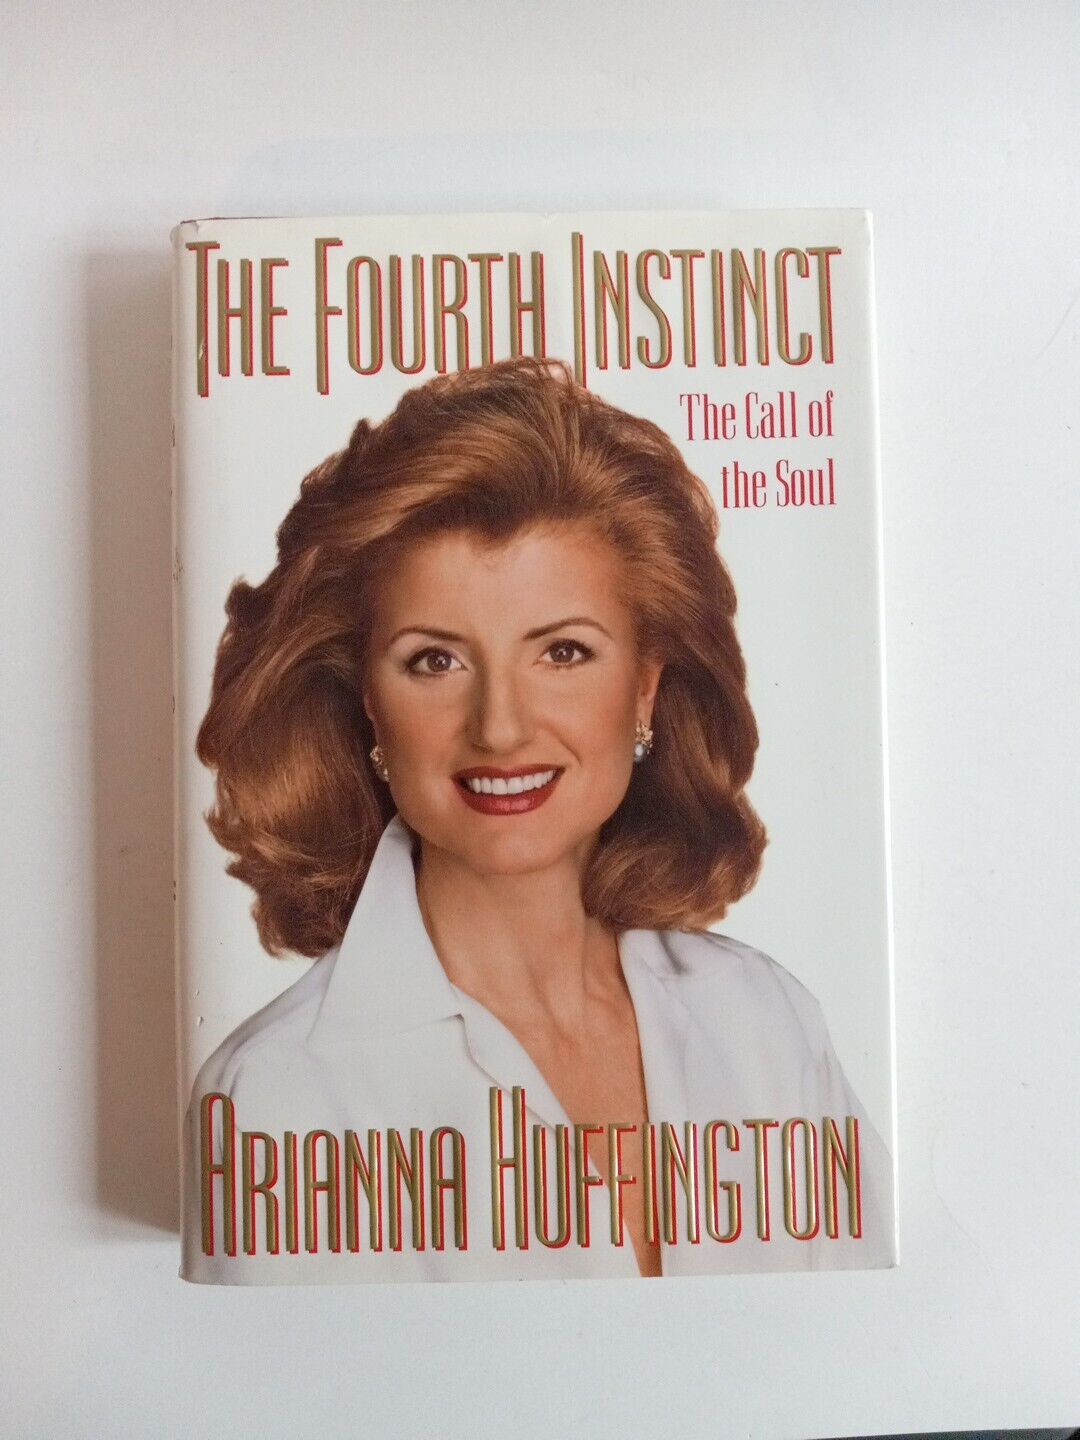 THE FOURTH INSTINCT Hardcover First Edition Signed By Arianna Huffington 